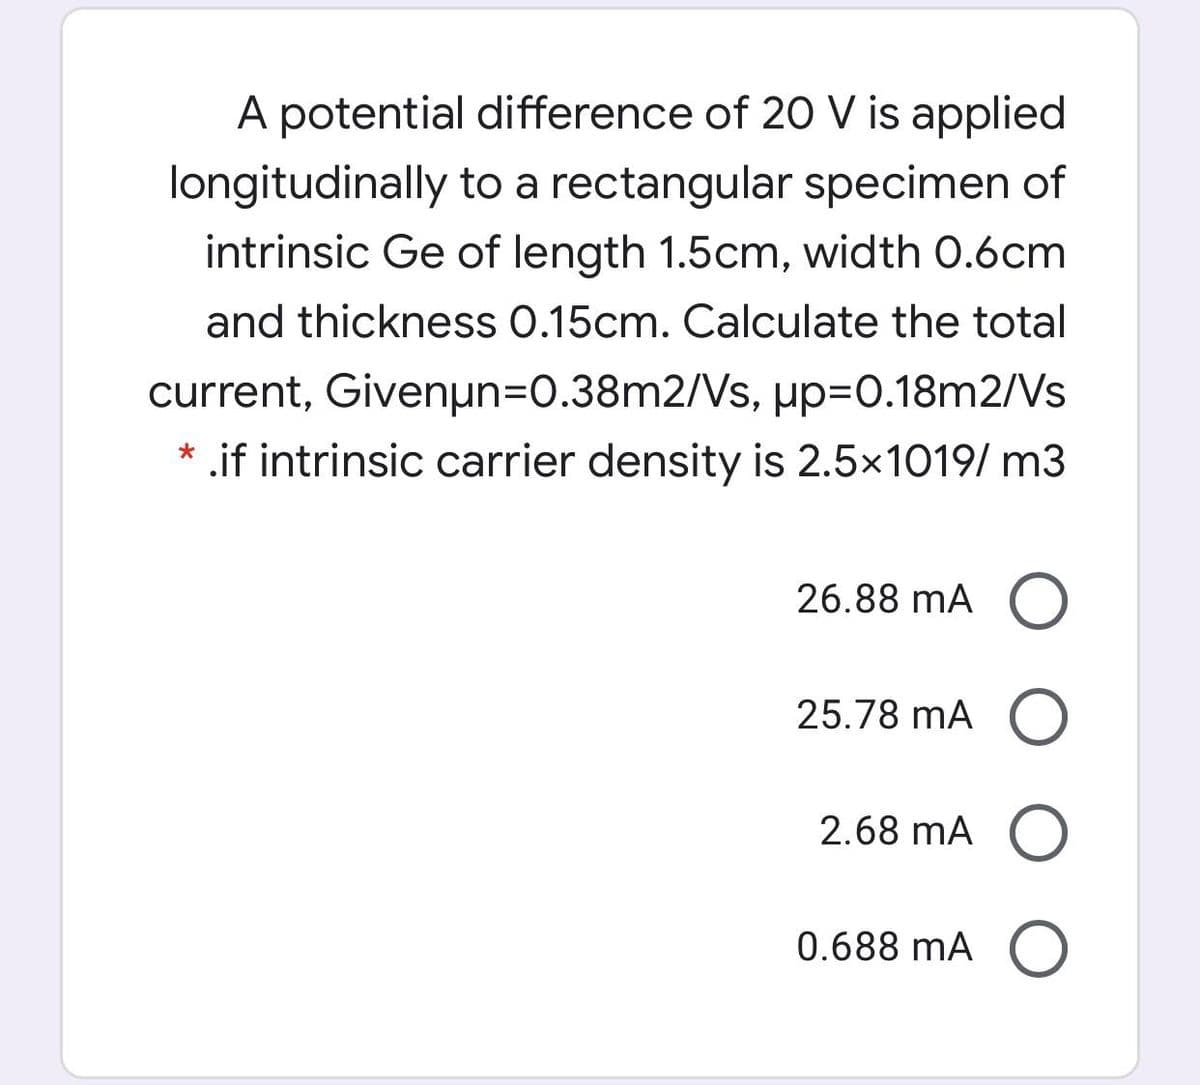 A potential difference of 20 V is applied
longitudinally to a rectangular specimen of
intrinsic Ge of length 1.5cm, width 0.6cm
and thickness 0.15cm. Calculate the total
µp=0.18m2/Vs
current, Givenun=0.38m2/Vs,
* .if intrinsic carrier density is 2.5x1019/ m3
26.88 mA (O
25.78 mA O
2.68 mA O
0.688 mA (
